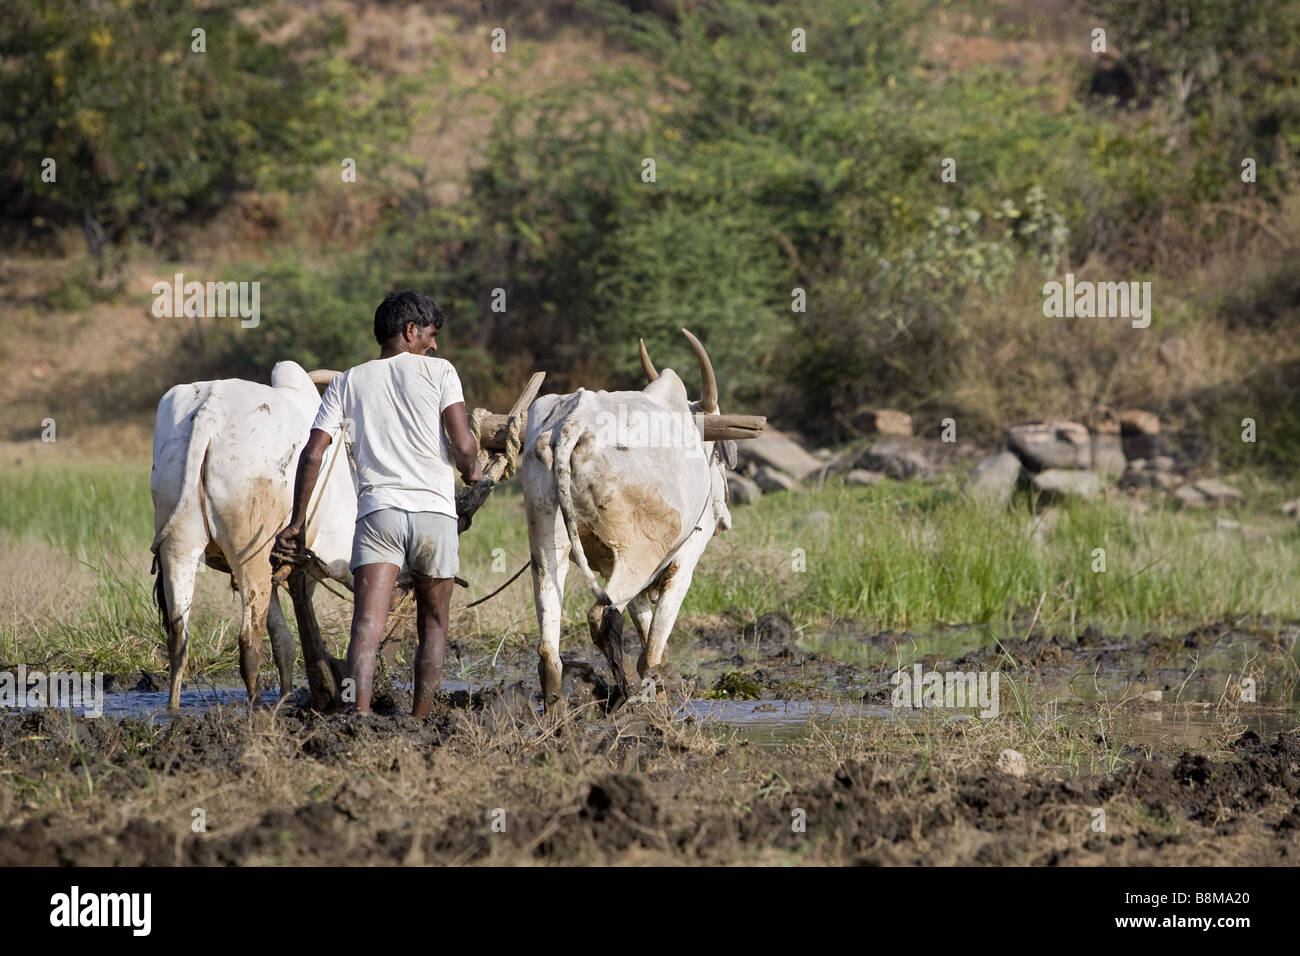 Indian man ploughing rice field Stock Photo